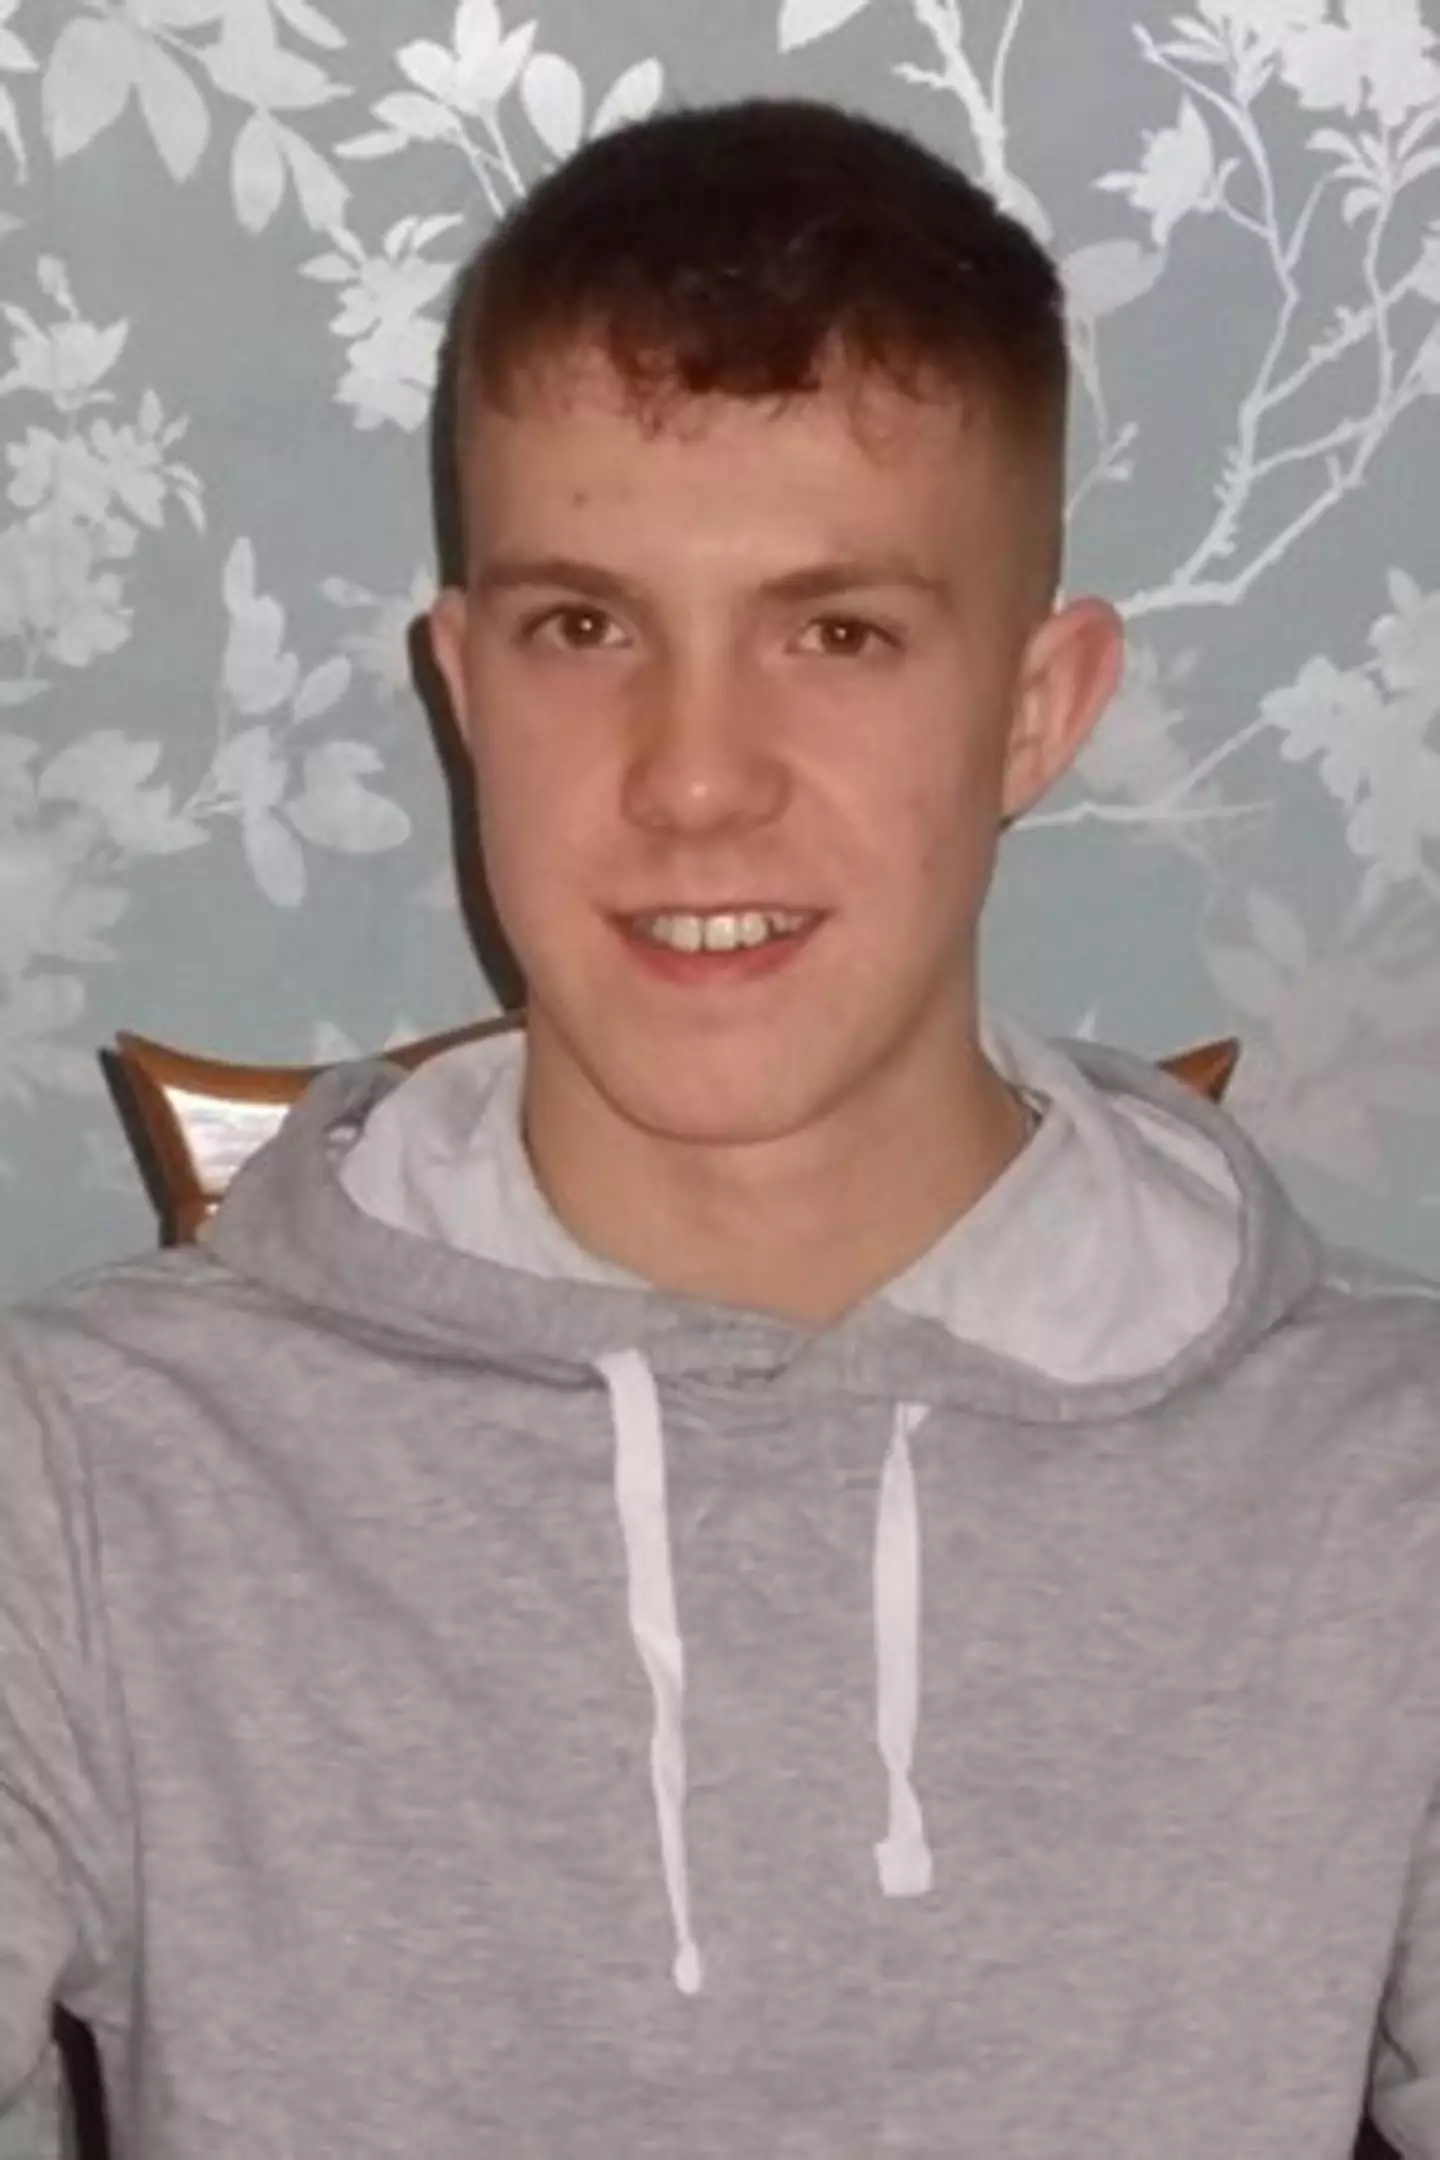 17-year-old Joe Abbess also tragically died following the incident.